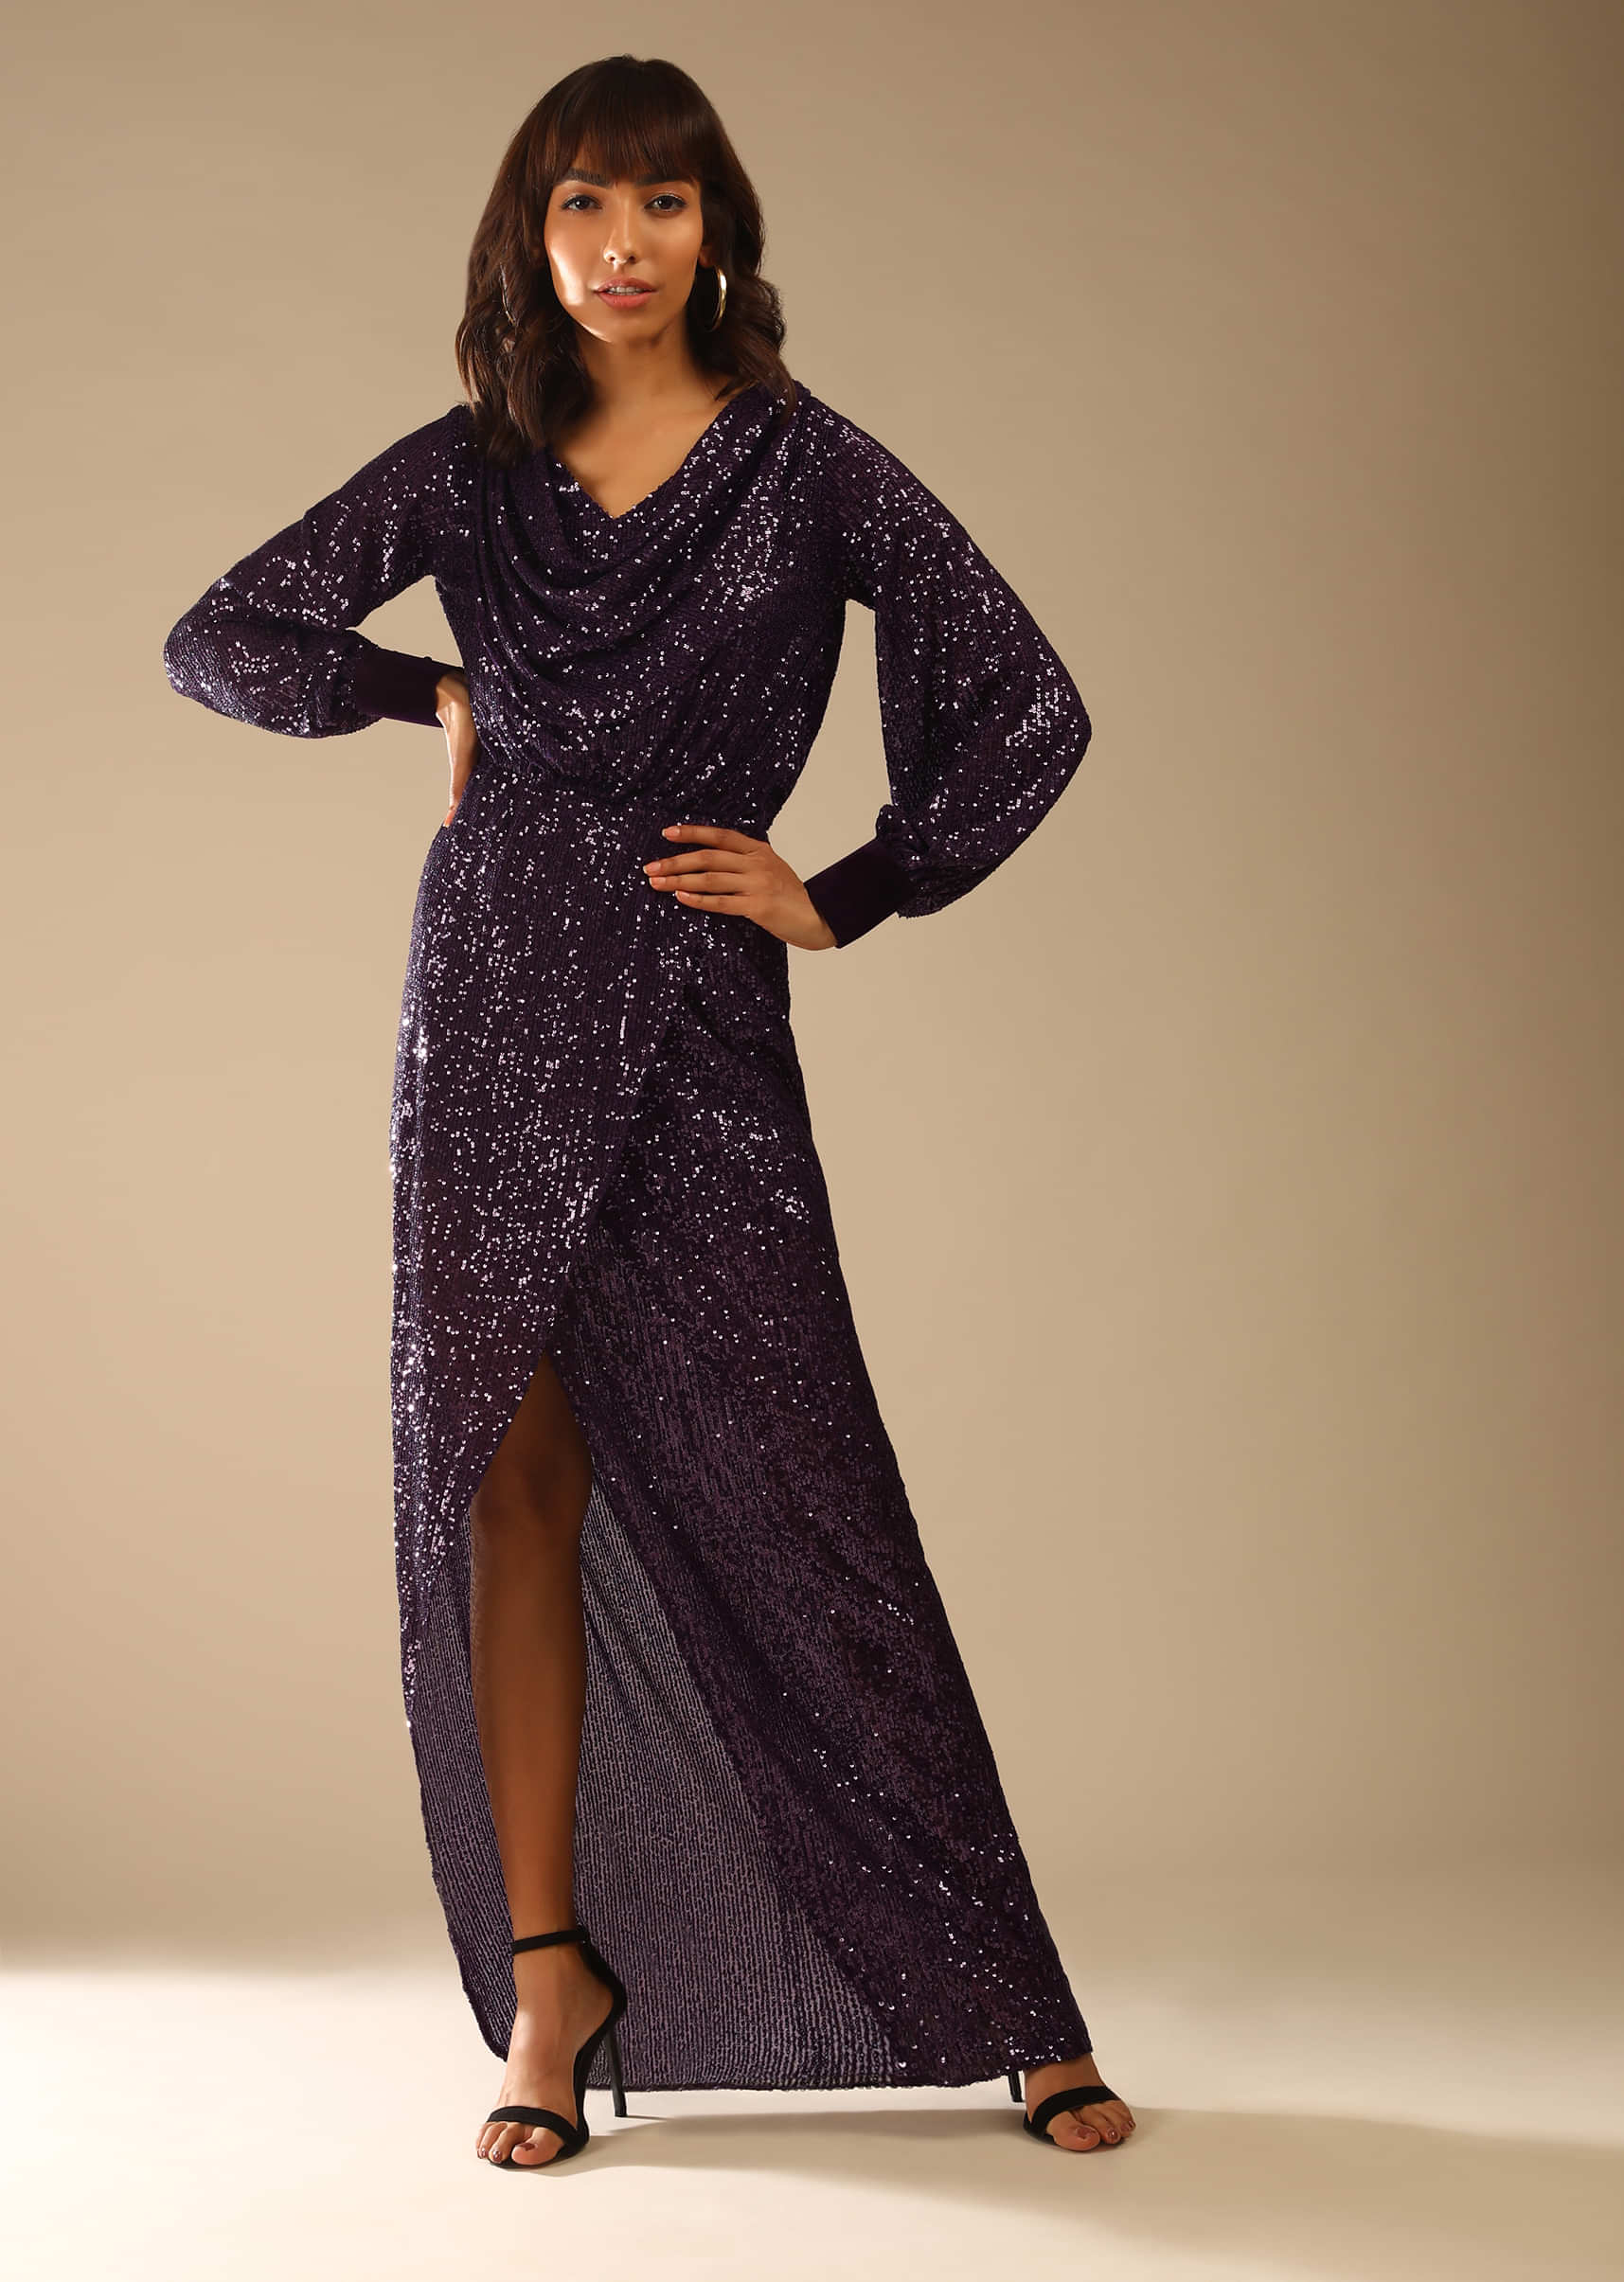 Wine Purple Gown Embellished In Sequins With Cowl Neckline And Peasant Sleeves